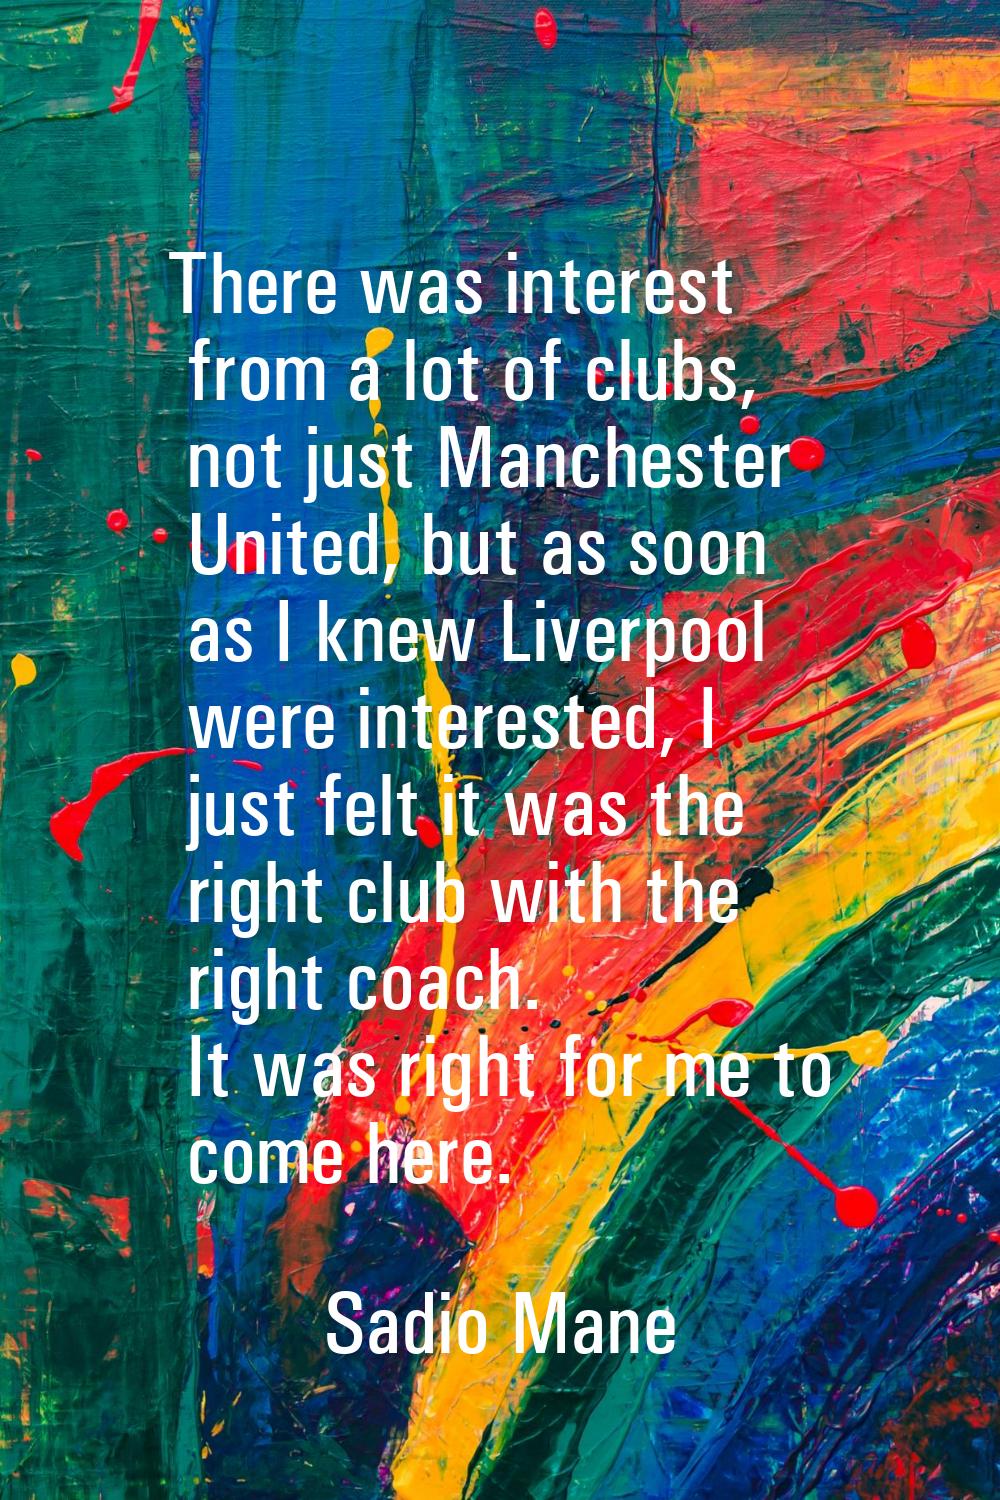 There was interest from a lot of clubs, not just Manchester United, but as soon as I knew Liverpool